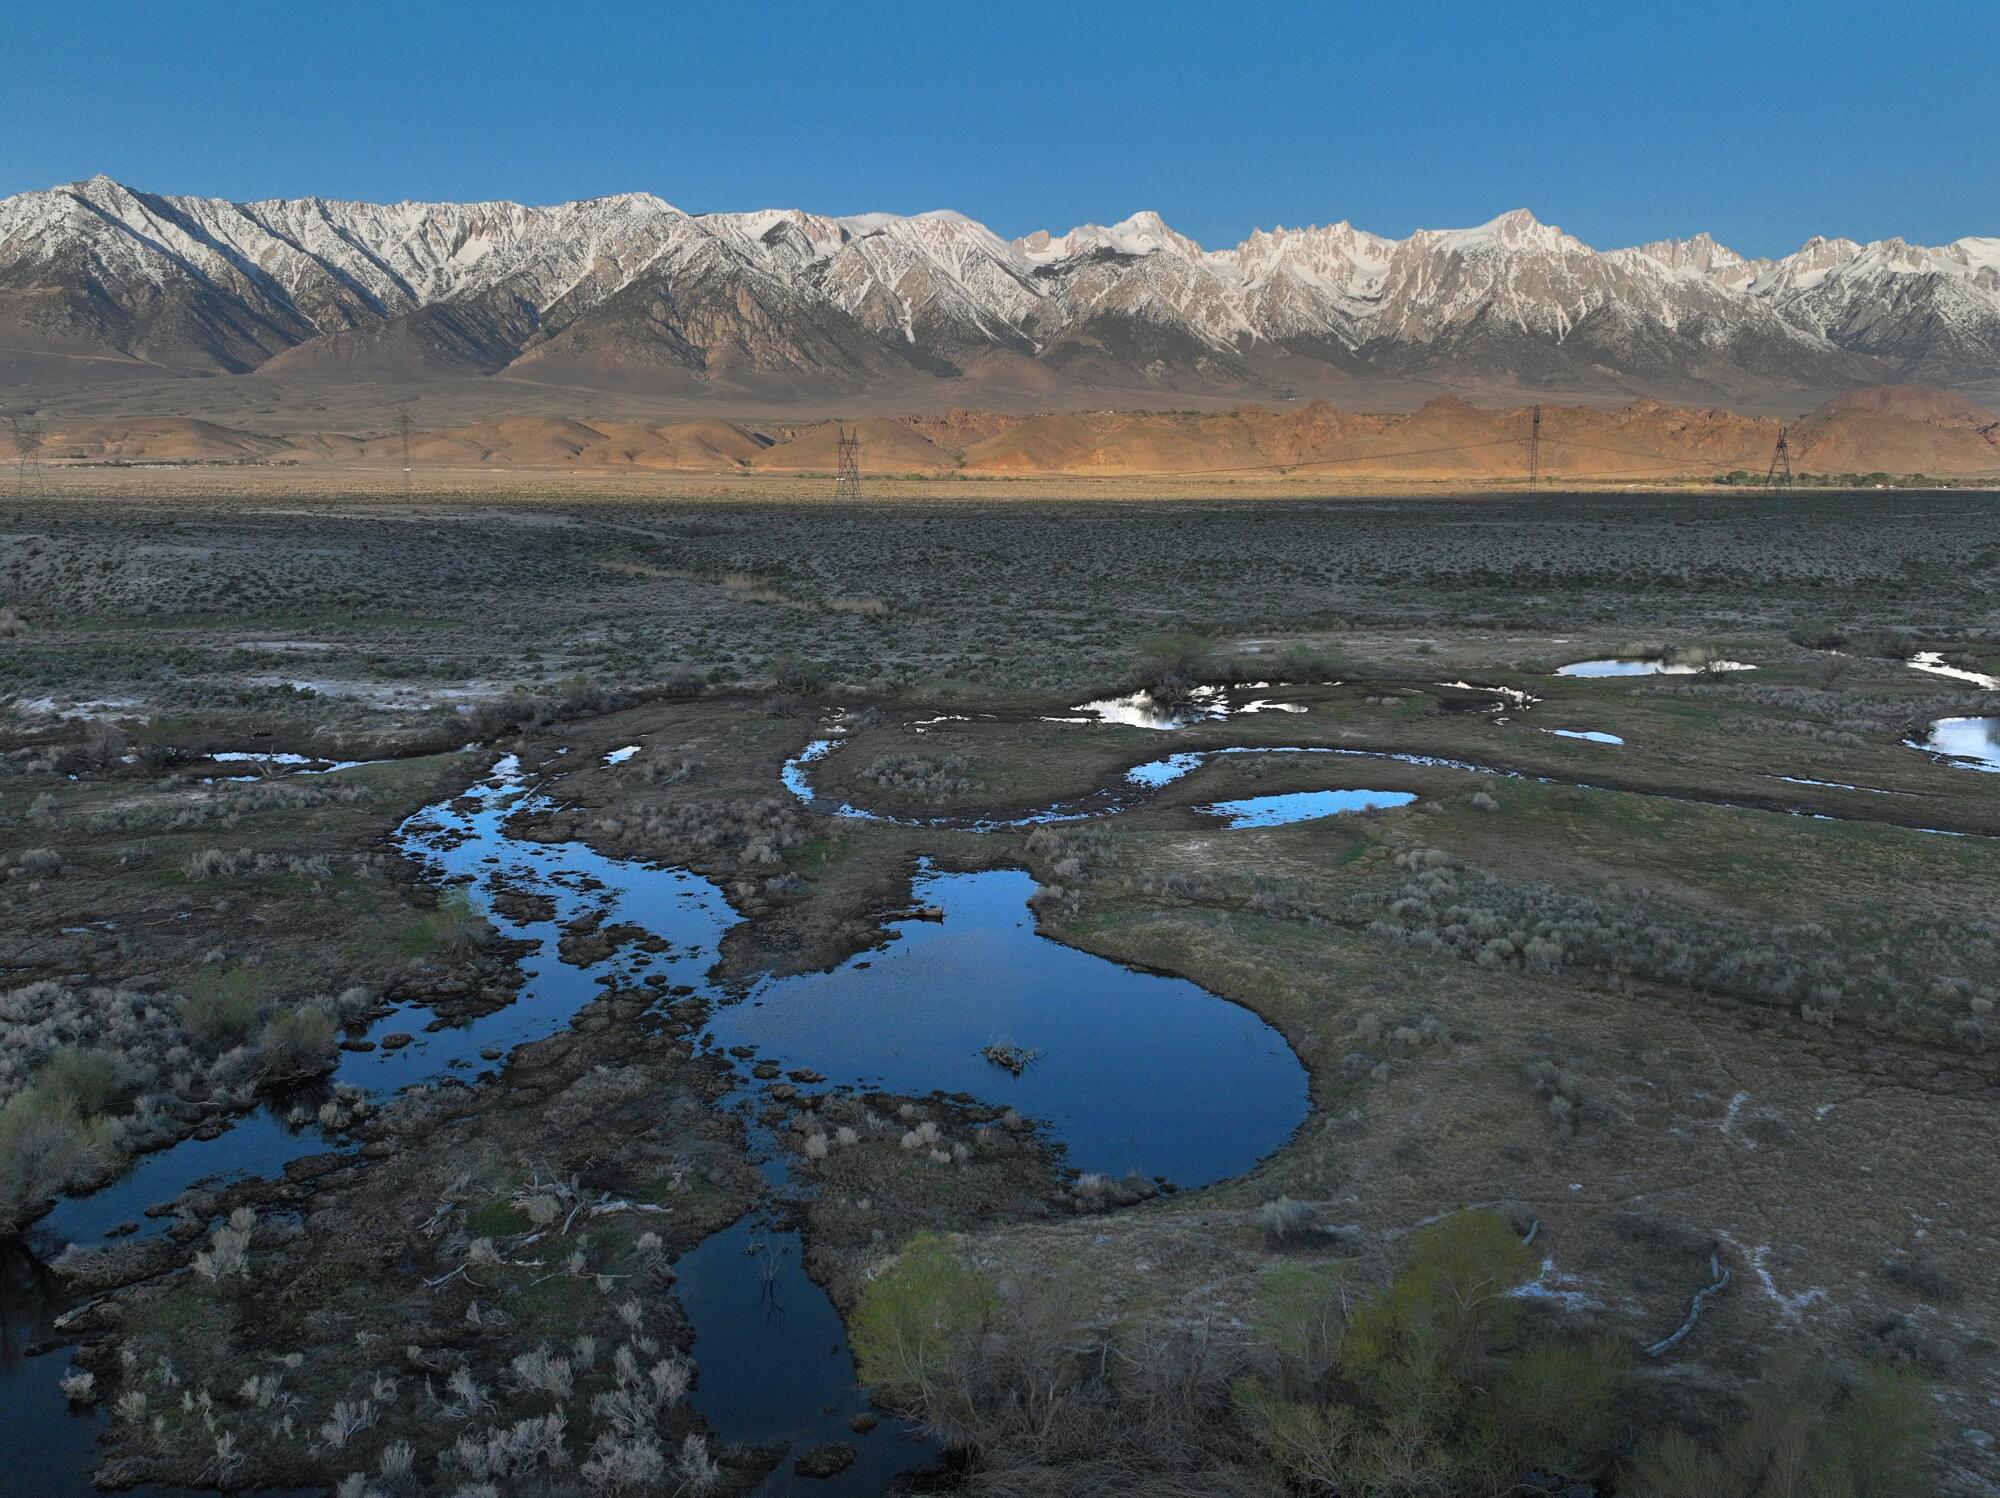 Water soaks the ground at Lower Owens River. 